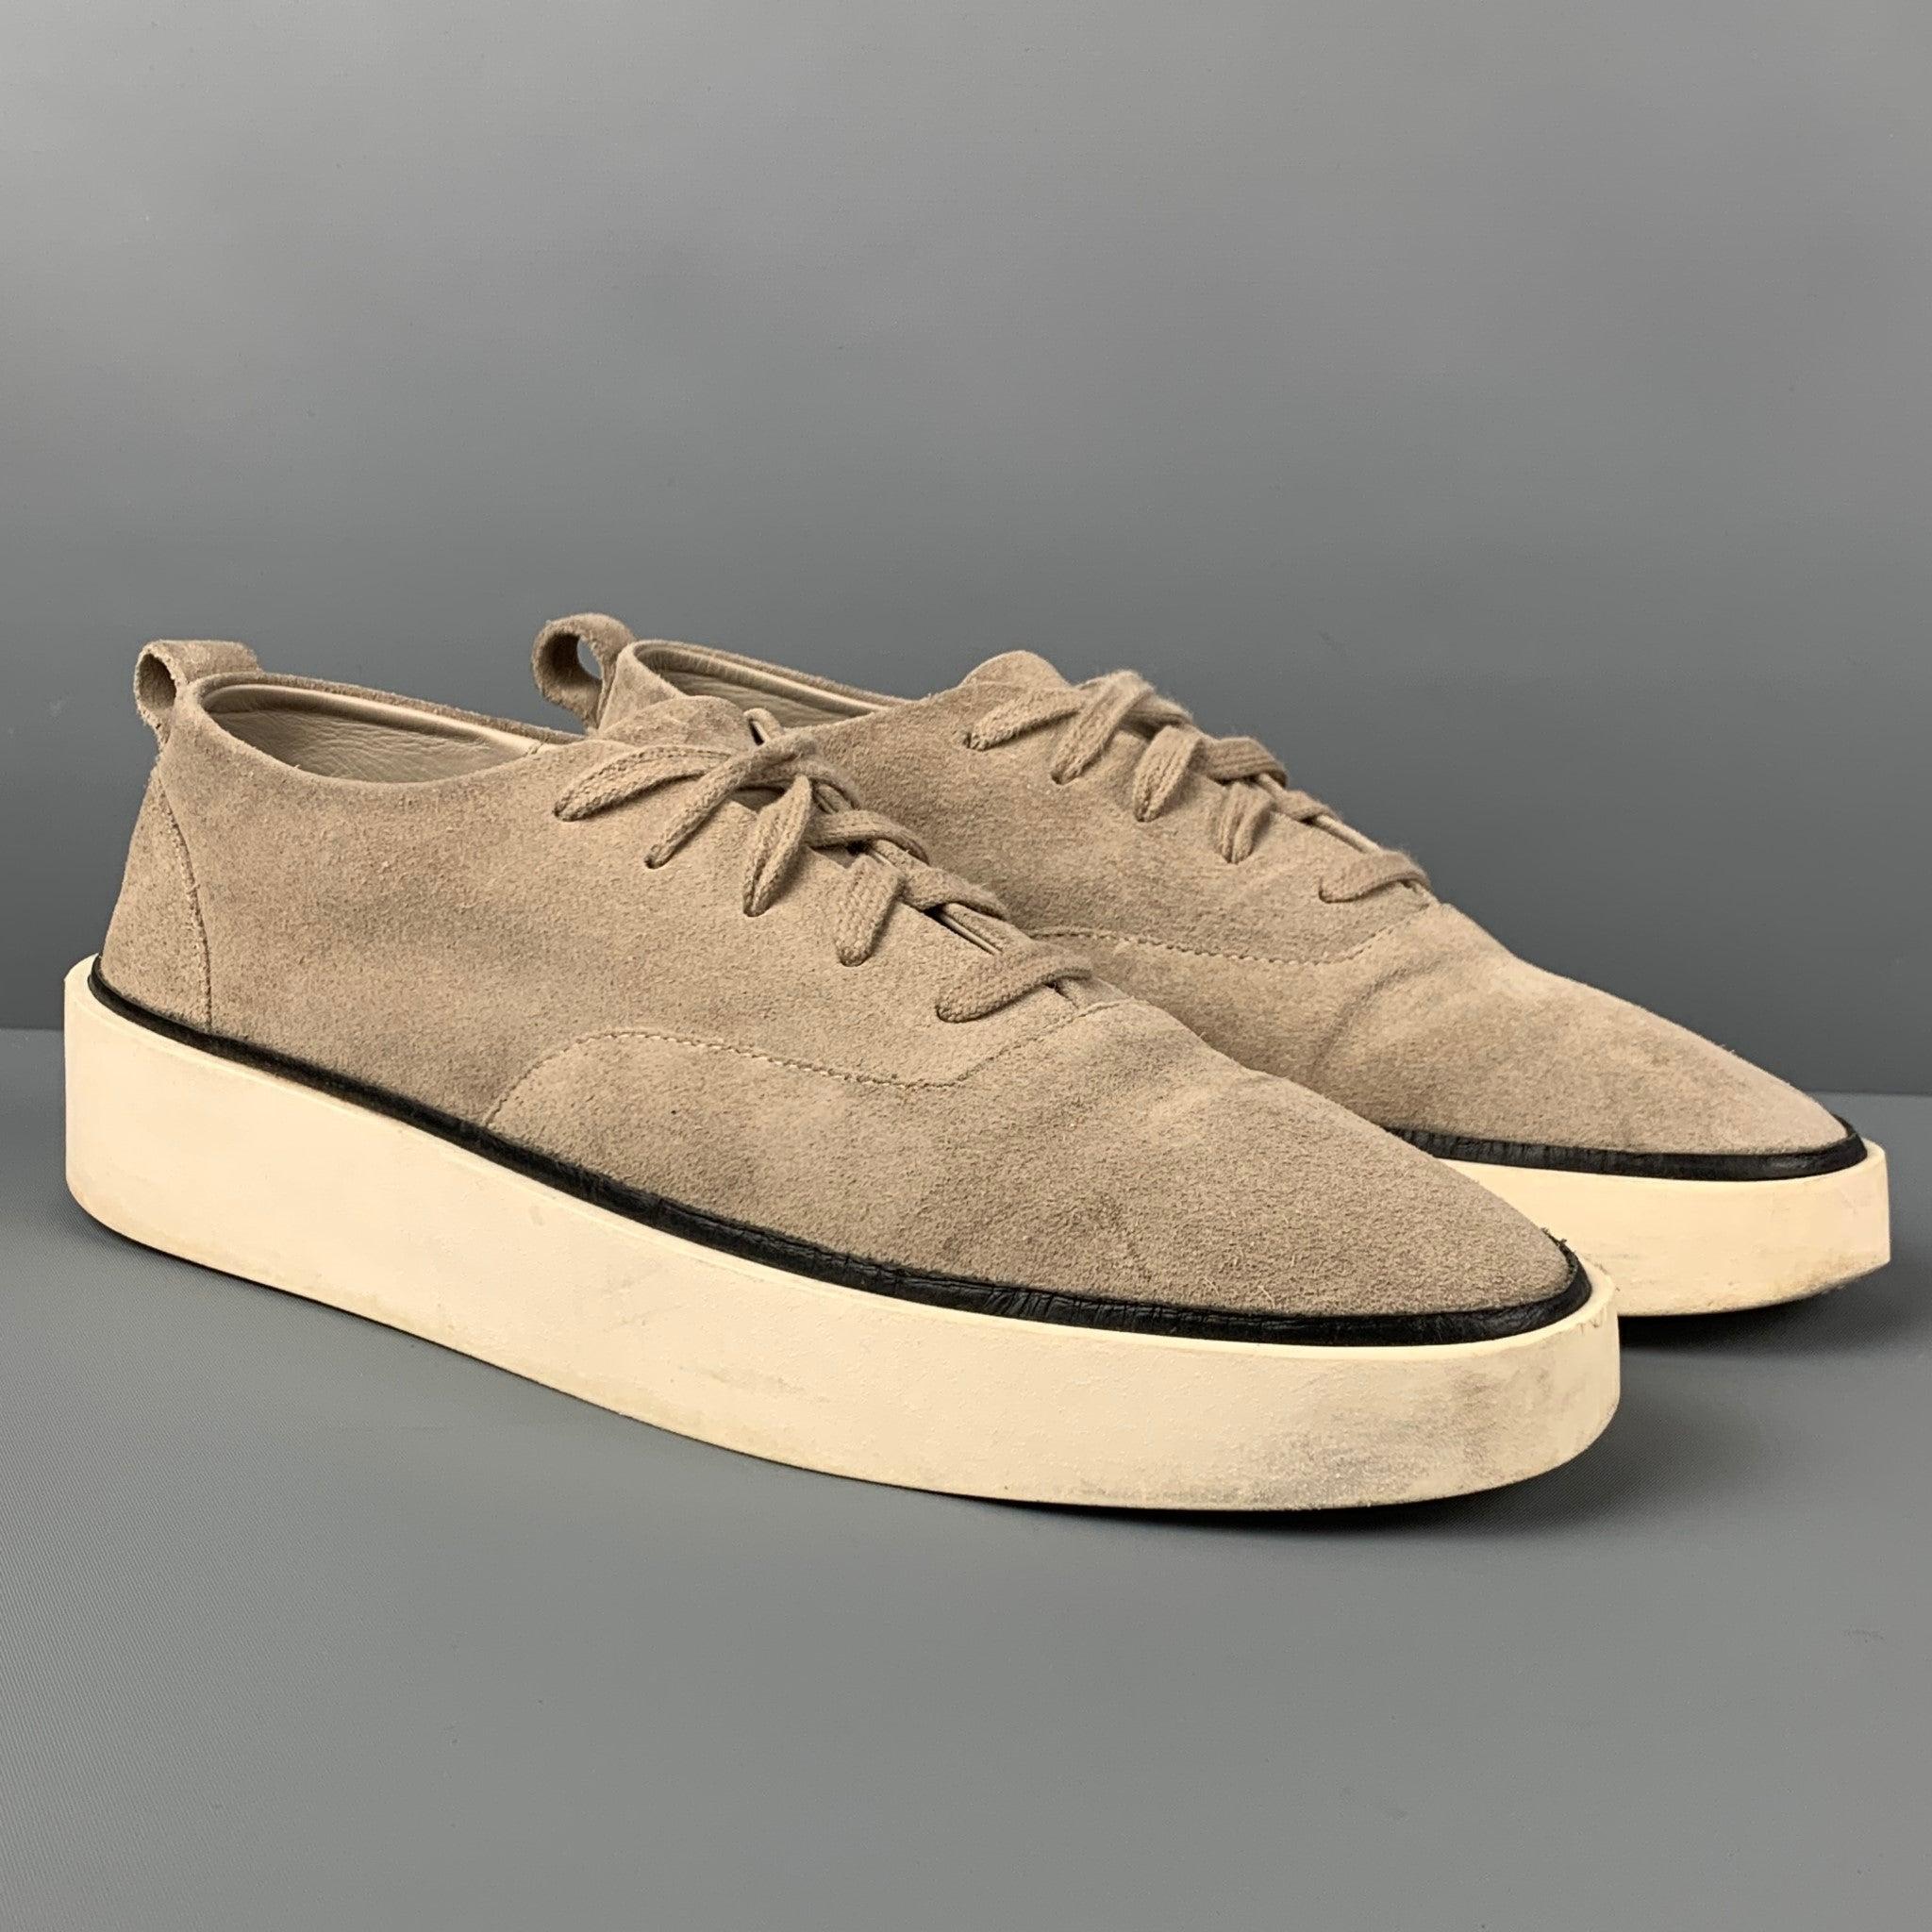 FEAR OF GOD sneakers comes in a light grey textured suede featuring a low-top style, black trim, and a lace up closure. Made in Italy.
Good
Pre-Owned Condition. 

Marked:   44Outsole: 12 inches  x 4 inches  
  
  
 
Reference: 119675
Category: